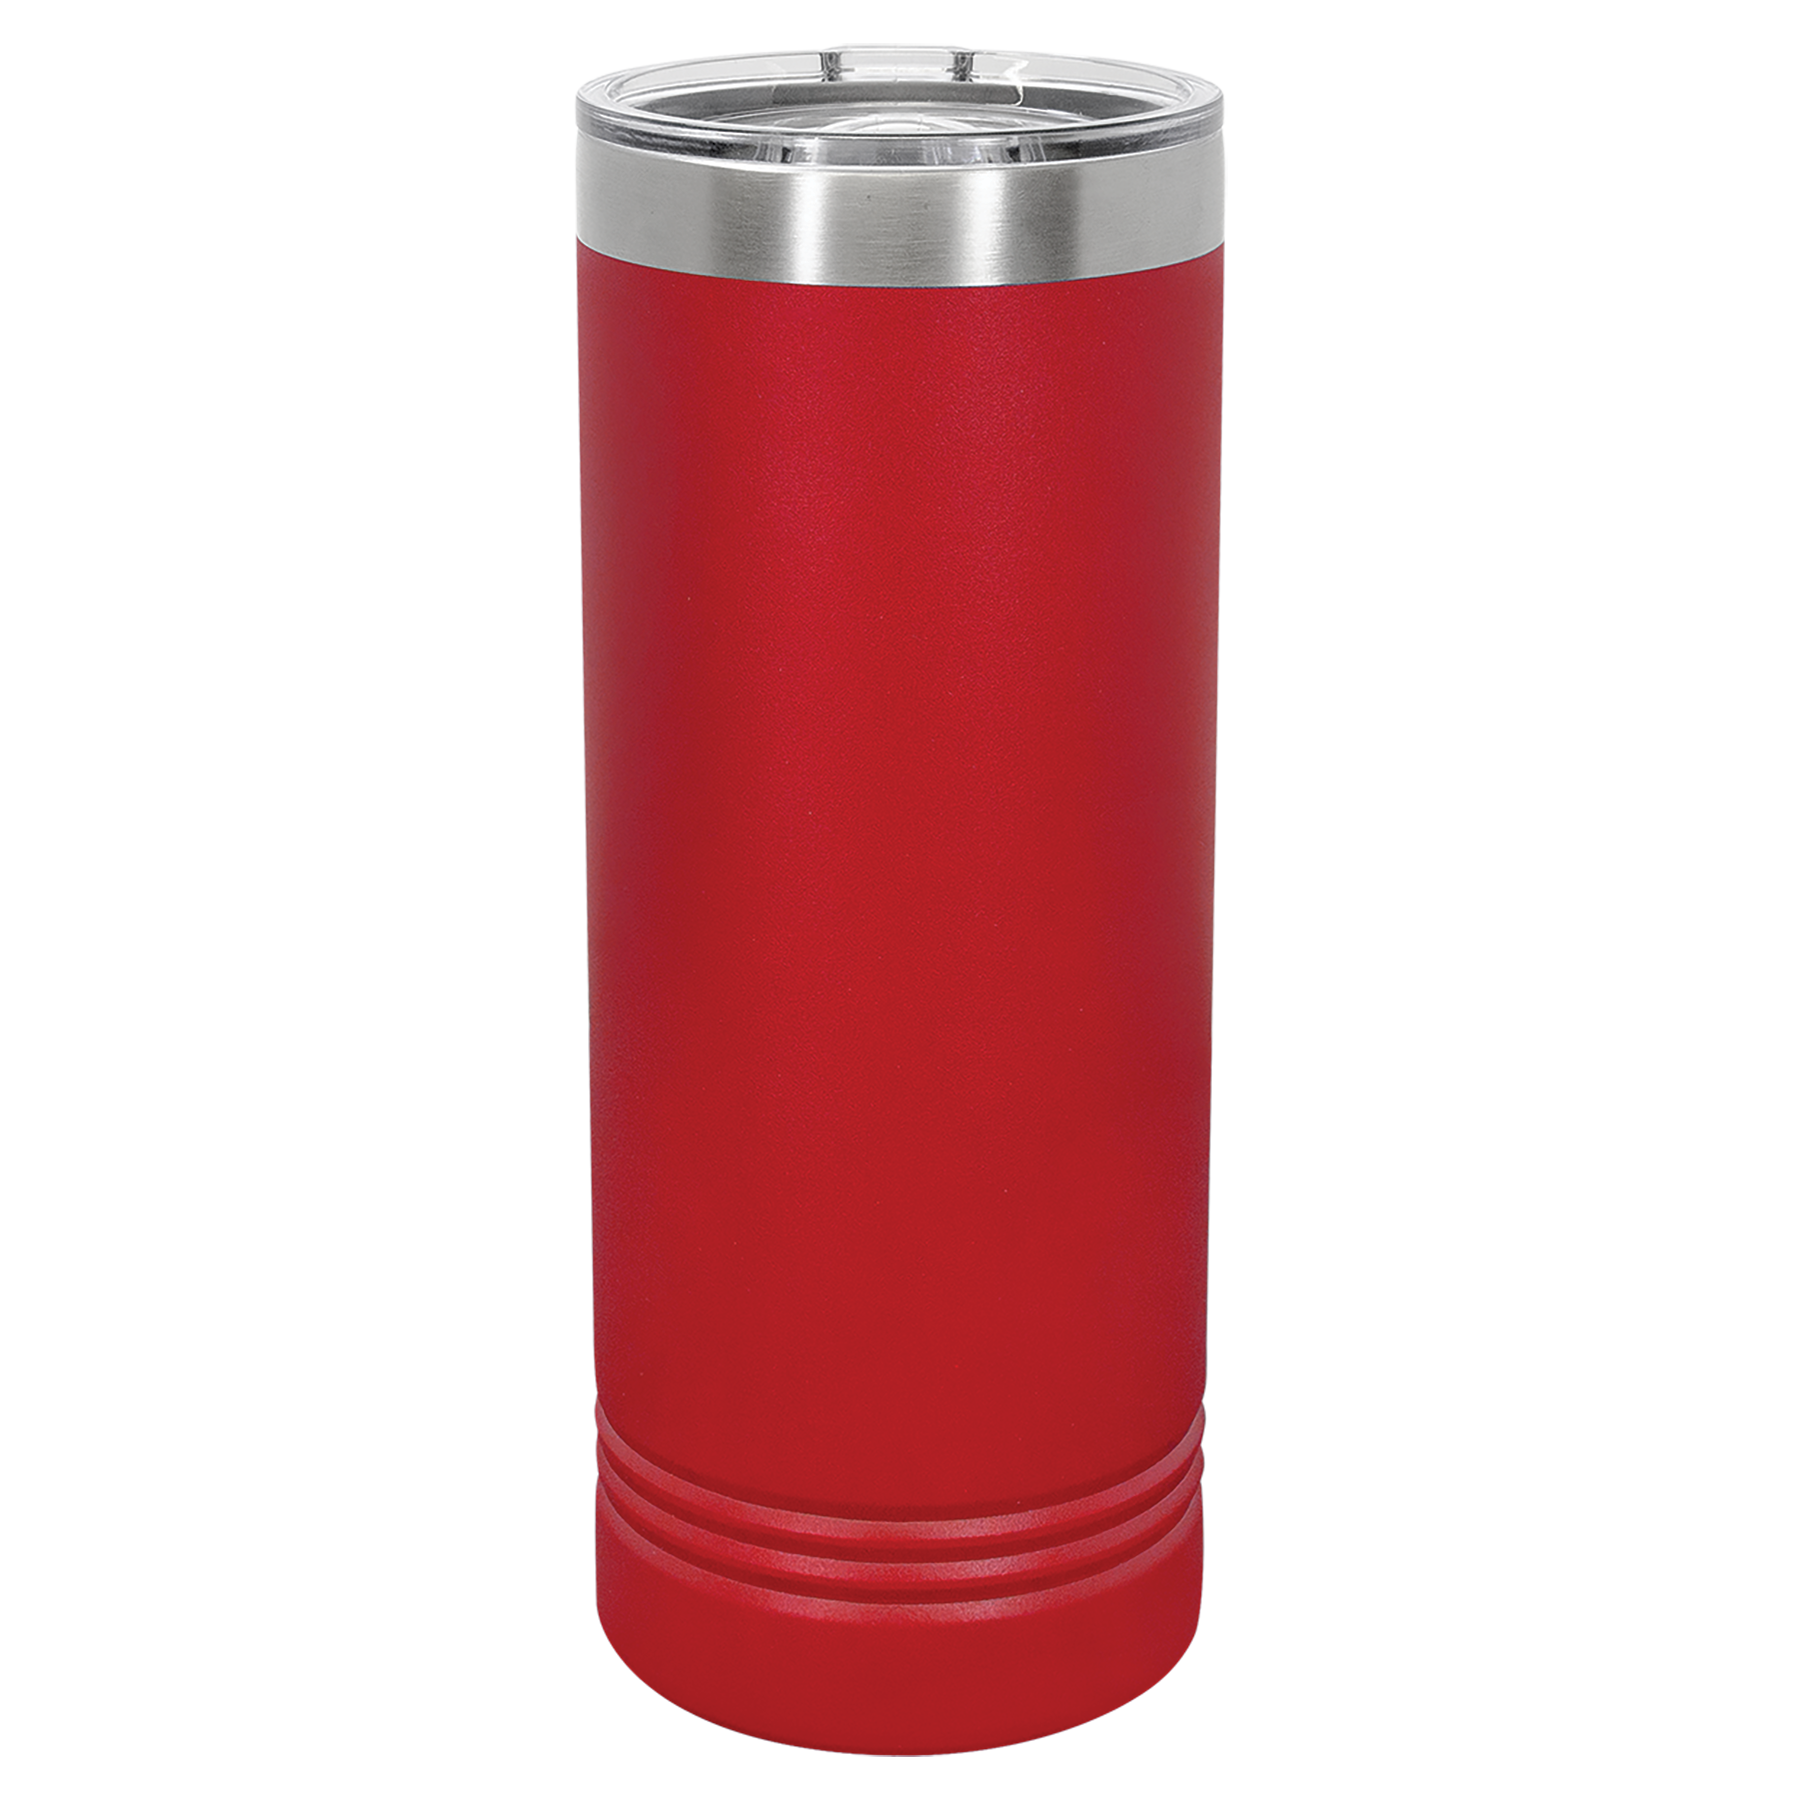 Red 22oz Skinny Tumbler -One Free Engraving  -Fits most Cup Holders  -Double-wall Vacuum Insulated  -Made from 18/8 Gauge Stainless Steel (Type 304 Food Grade)  -Lid is BPA Free (Hand Wash Only)  -Dishwasher Safe  -Works with Cold and Hot Drinks  -18 Color Options  -Perfect for Personalized Gifts, Awards, Incentives, Swag & Fundraisers